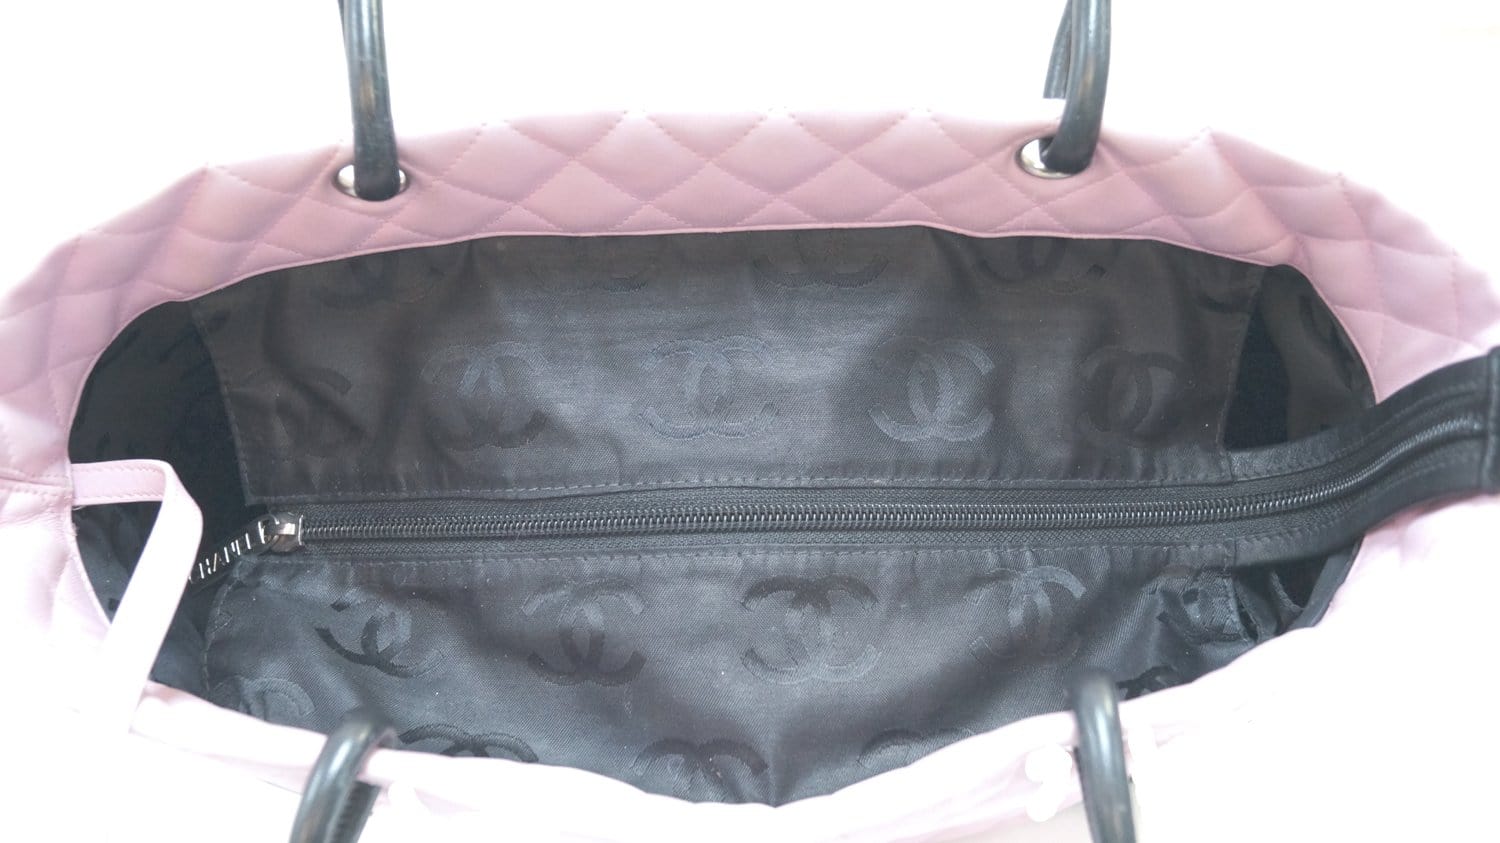 Chanel Cambon Pink Black Lambs Leather Large Shoulder Tote Bag